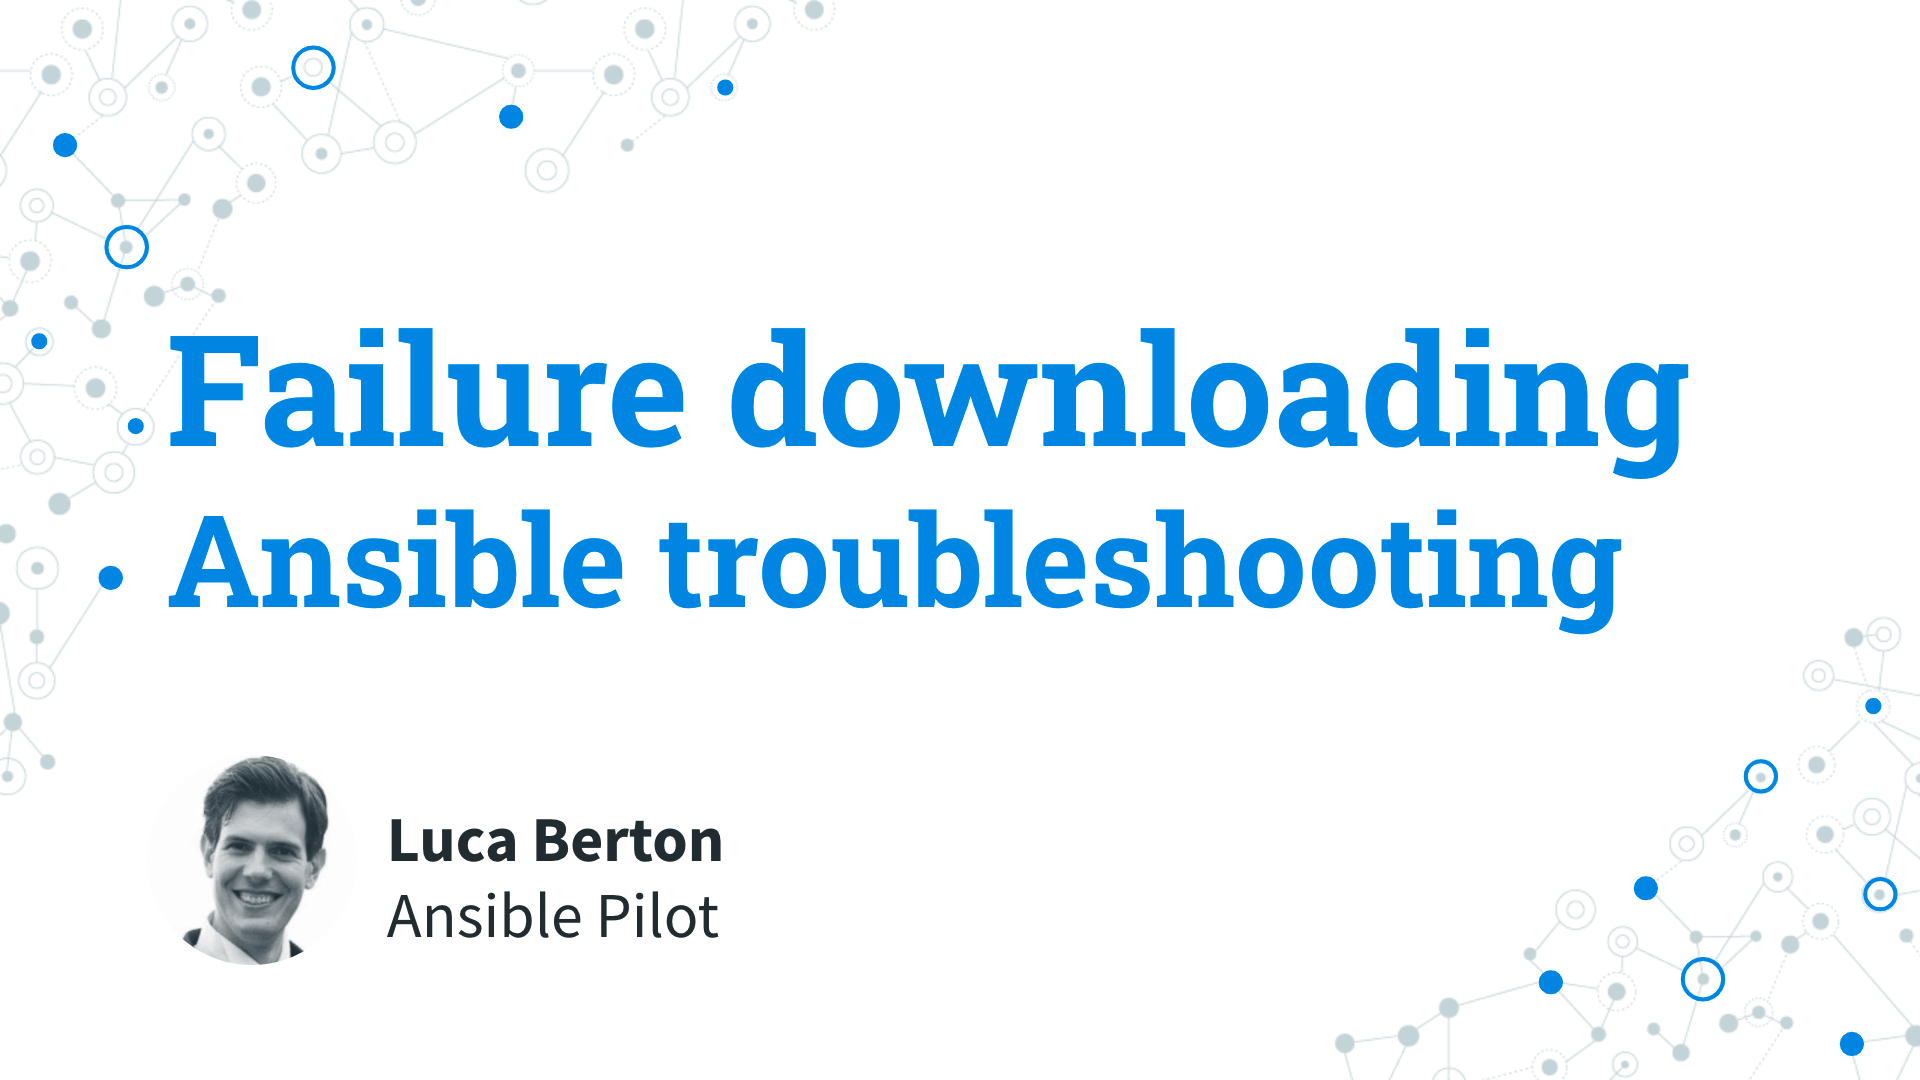 Ansible Troubleshooting: Addressing Failure Downloading Error